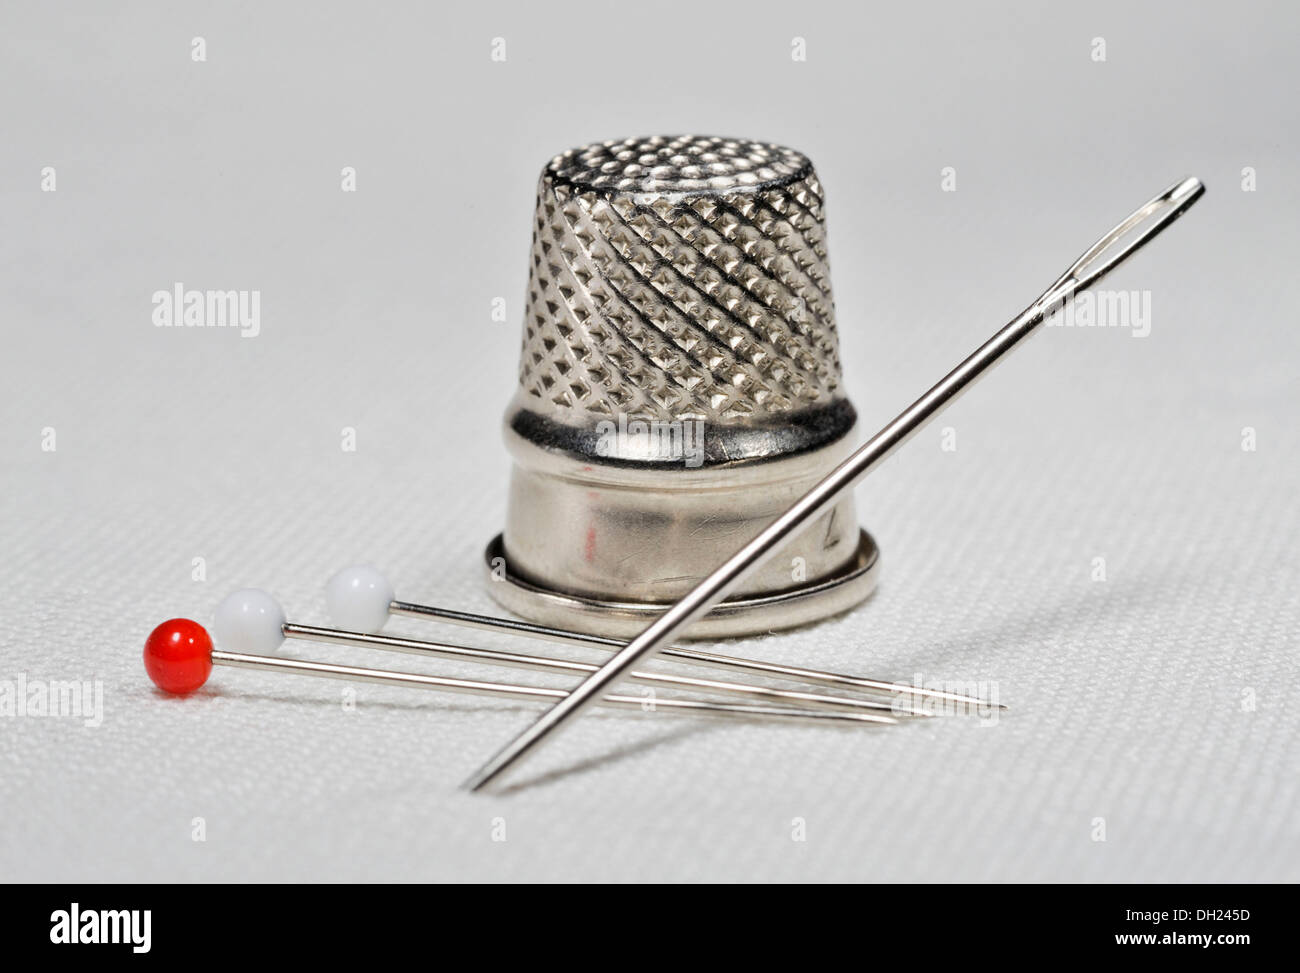 Sewing needle, pins and thimble lying on white linen fabric Stock Photo